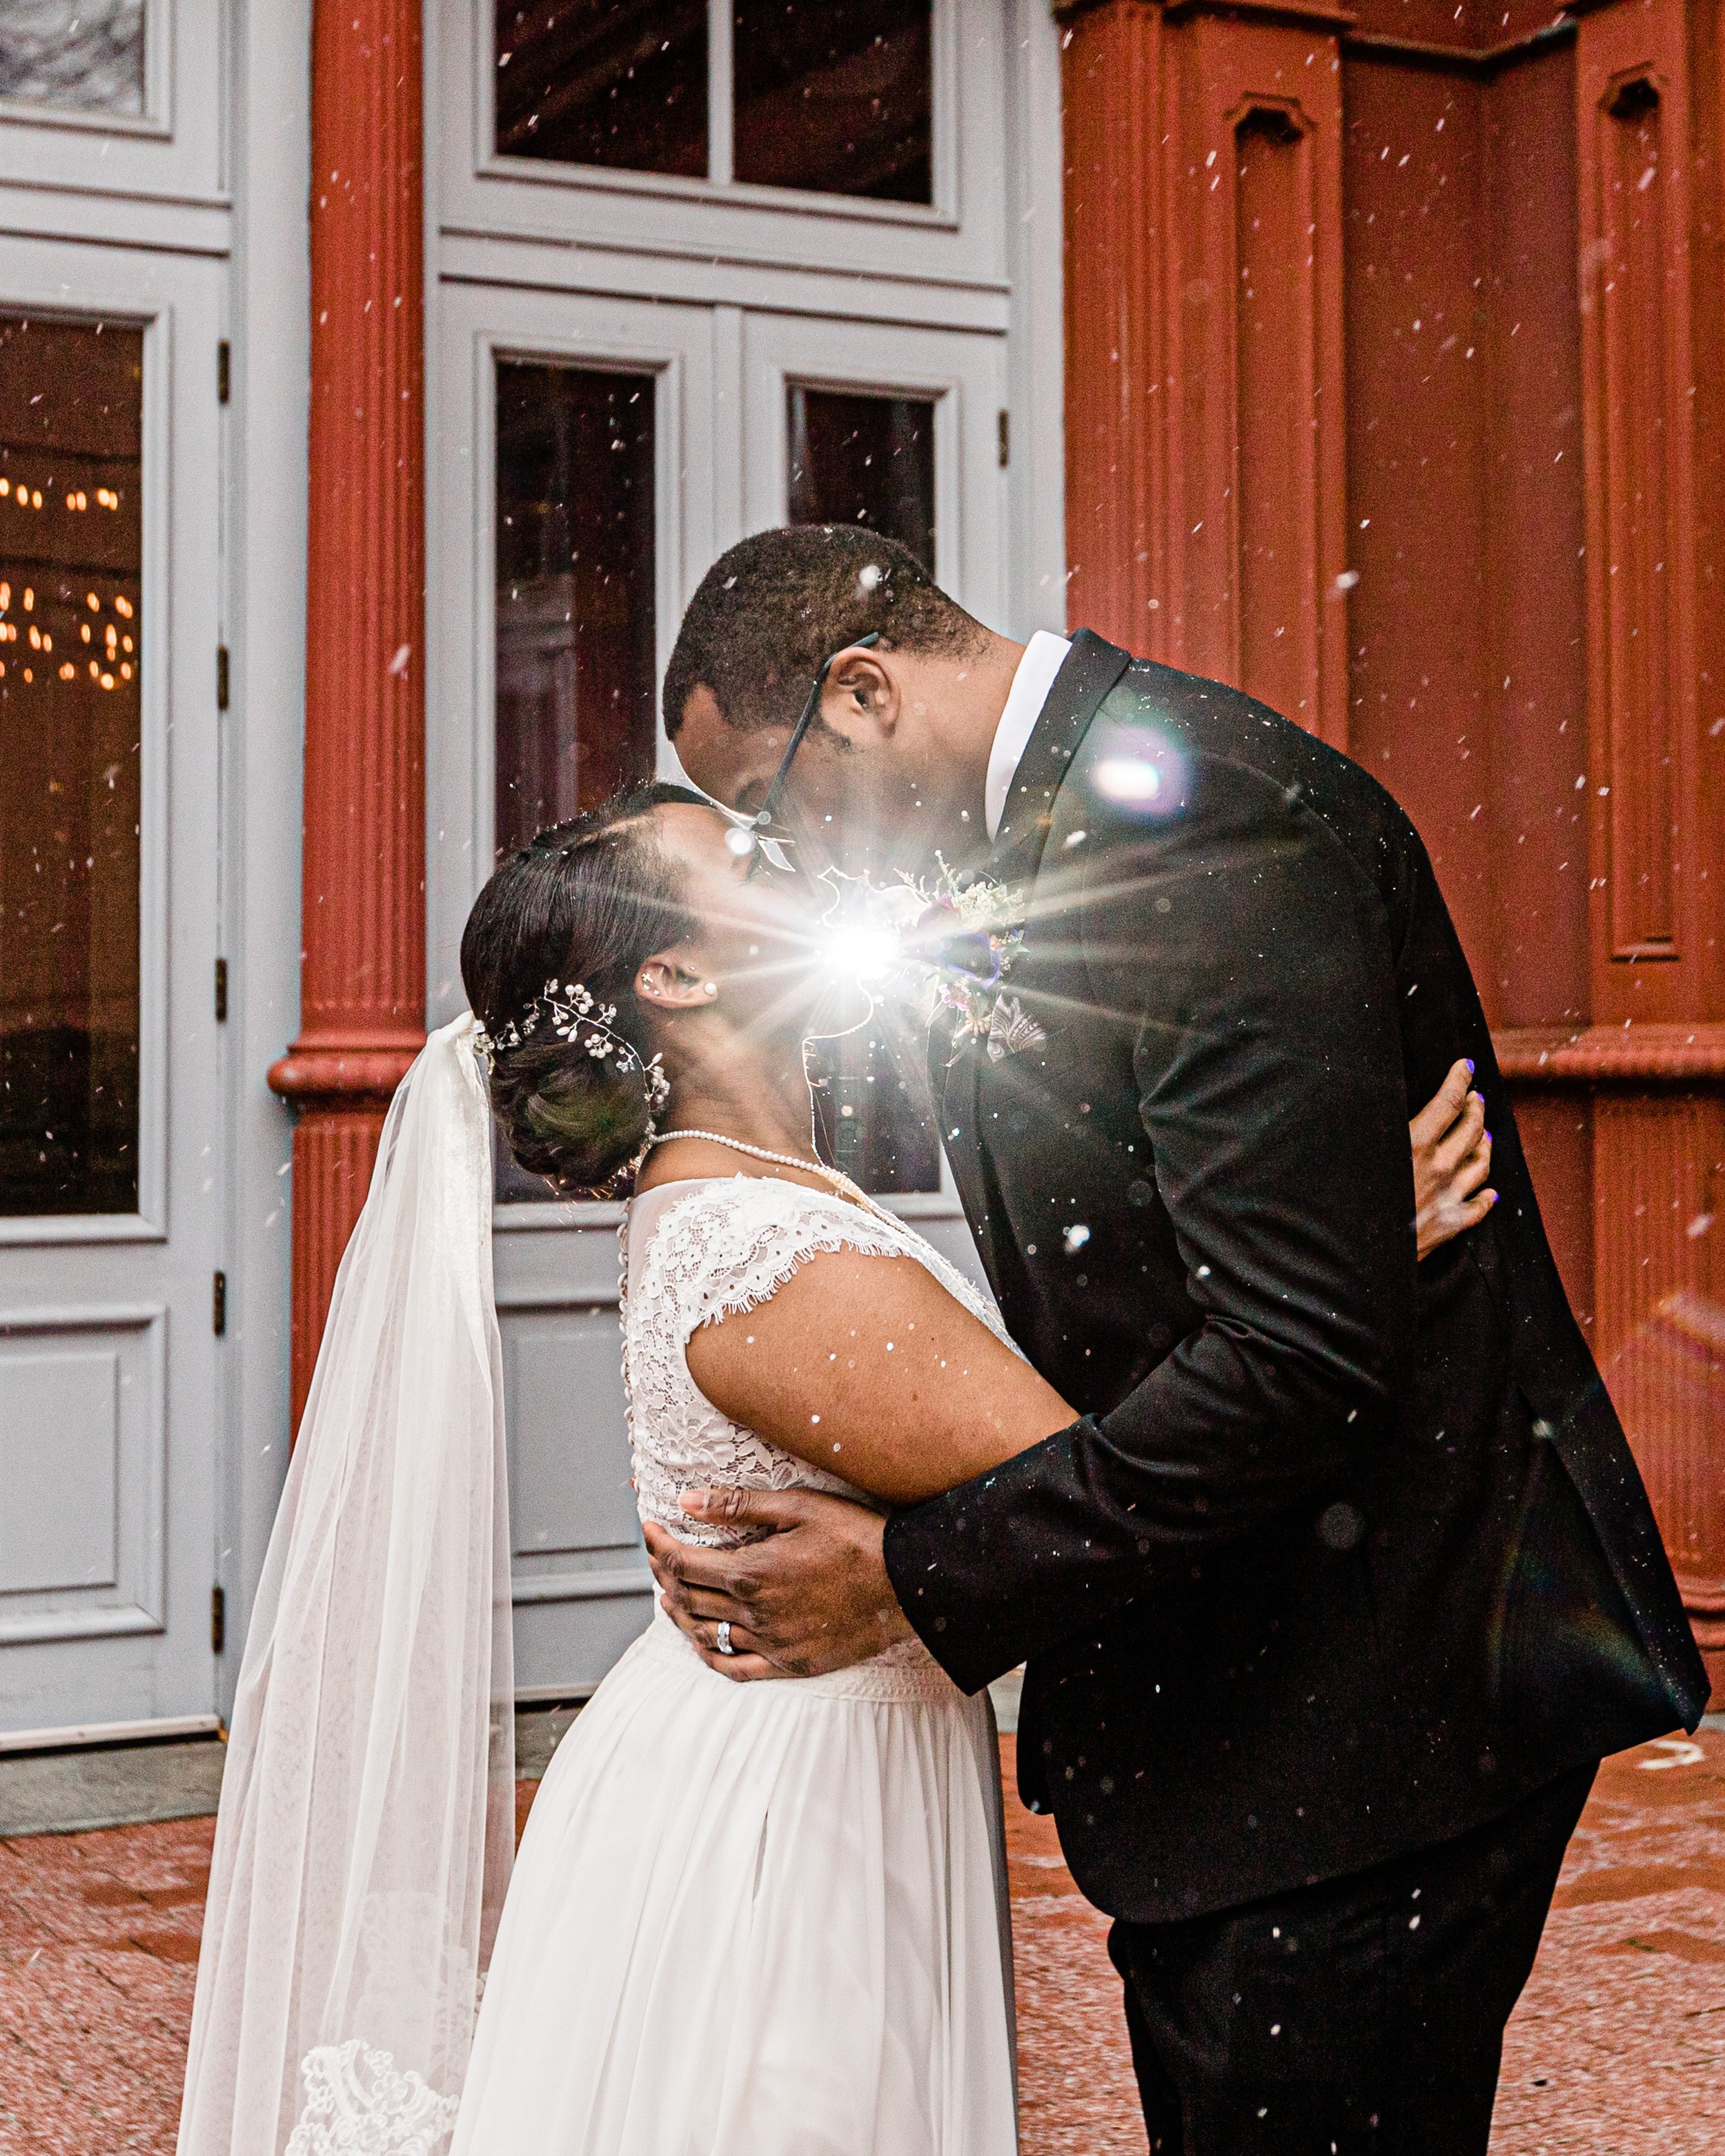 Snowy Winter Wedding at 1840's Plaza in Baltimore City Megapixels Media Photography-20.jpg